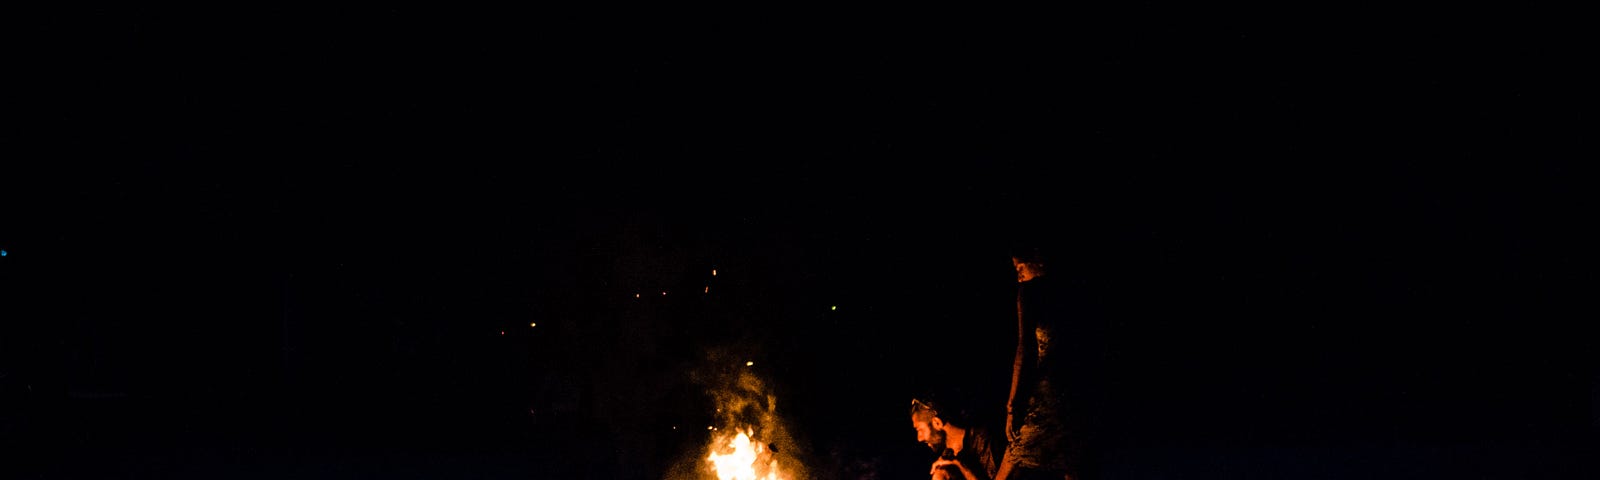 Two people having a campfire.